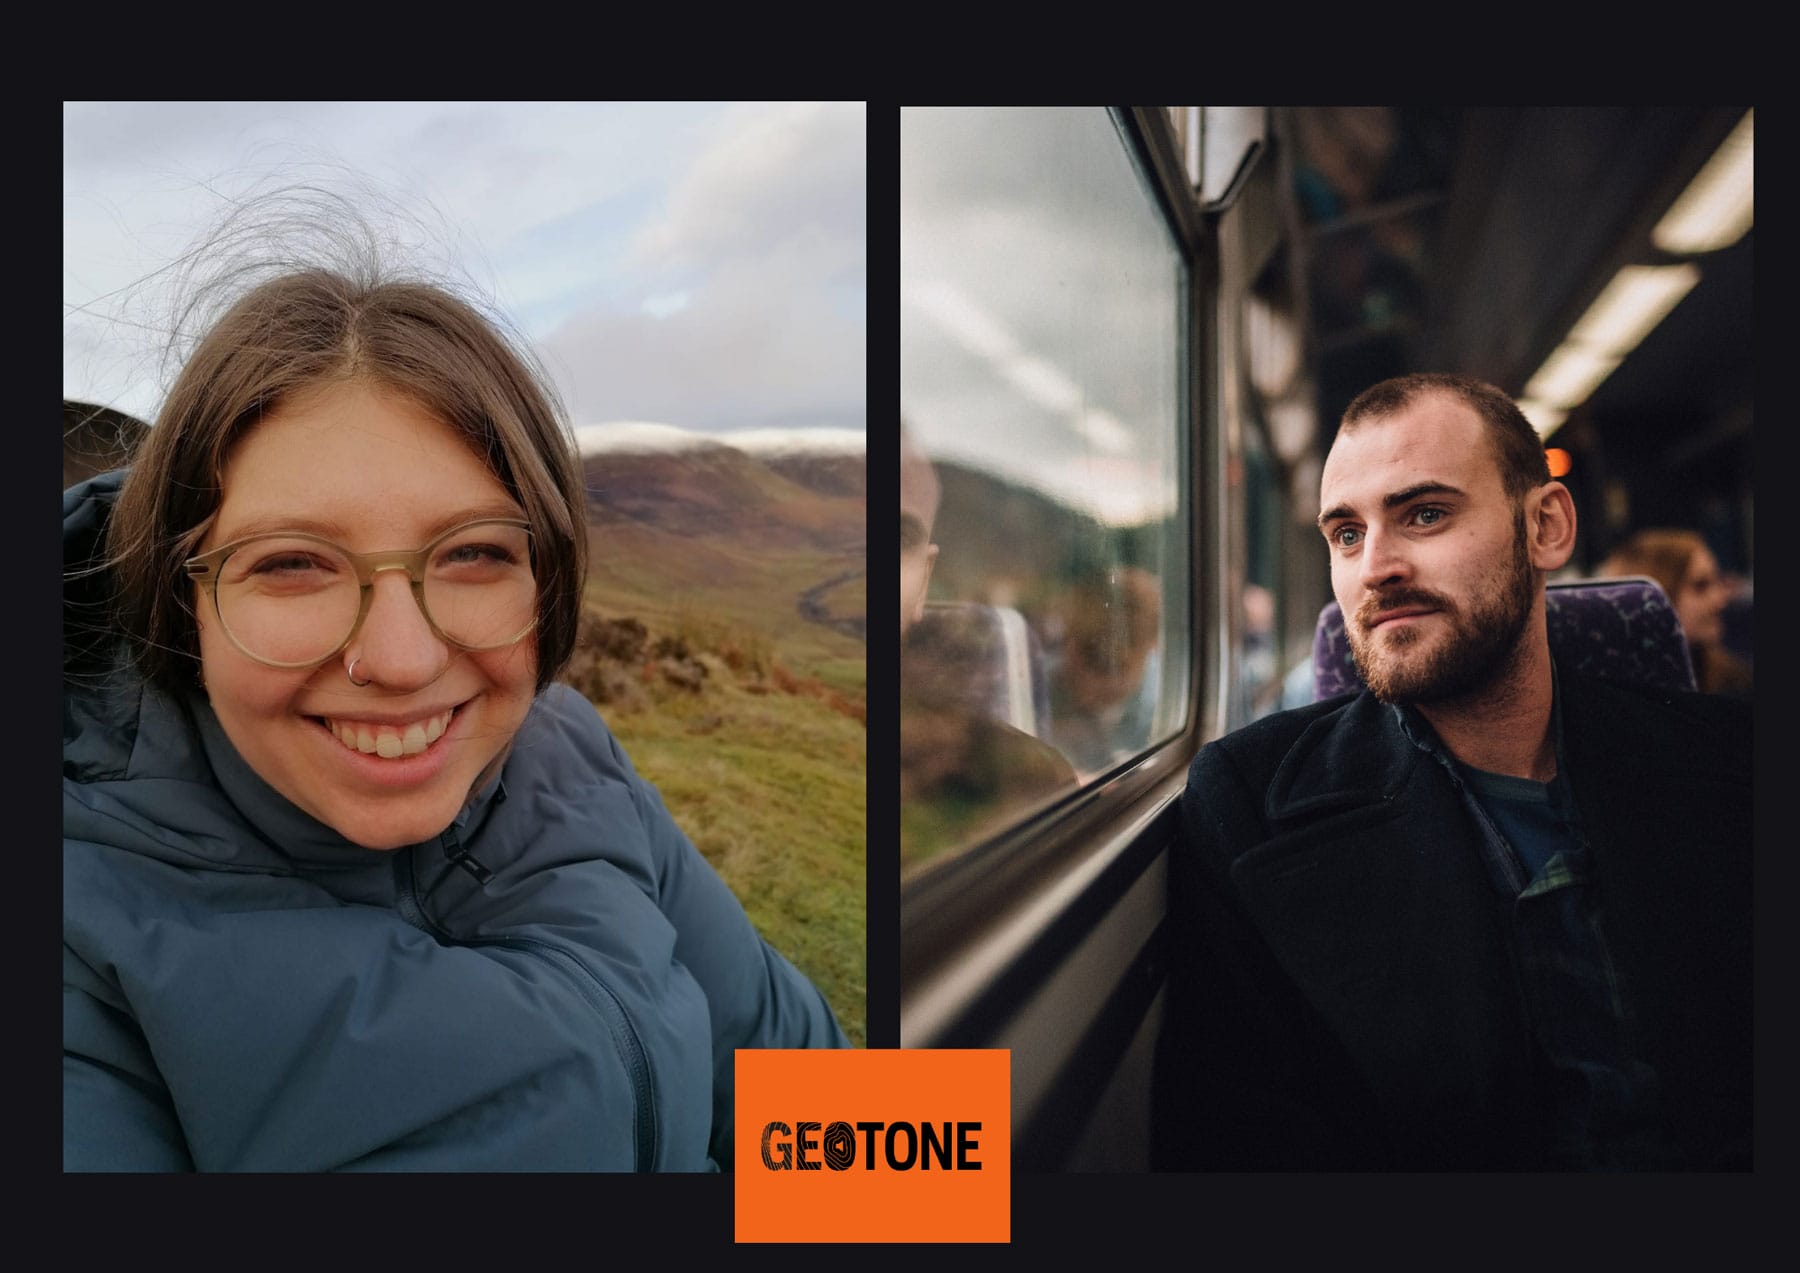 An image comprised of two photos. On the left, Lauren is pictured outdoors wearing a warm winter coat. On the right, Paul is pictured on a train with countryside outside the window.